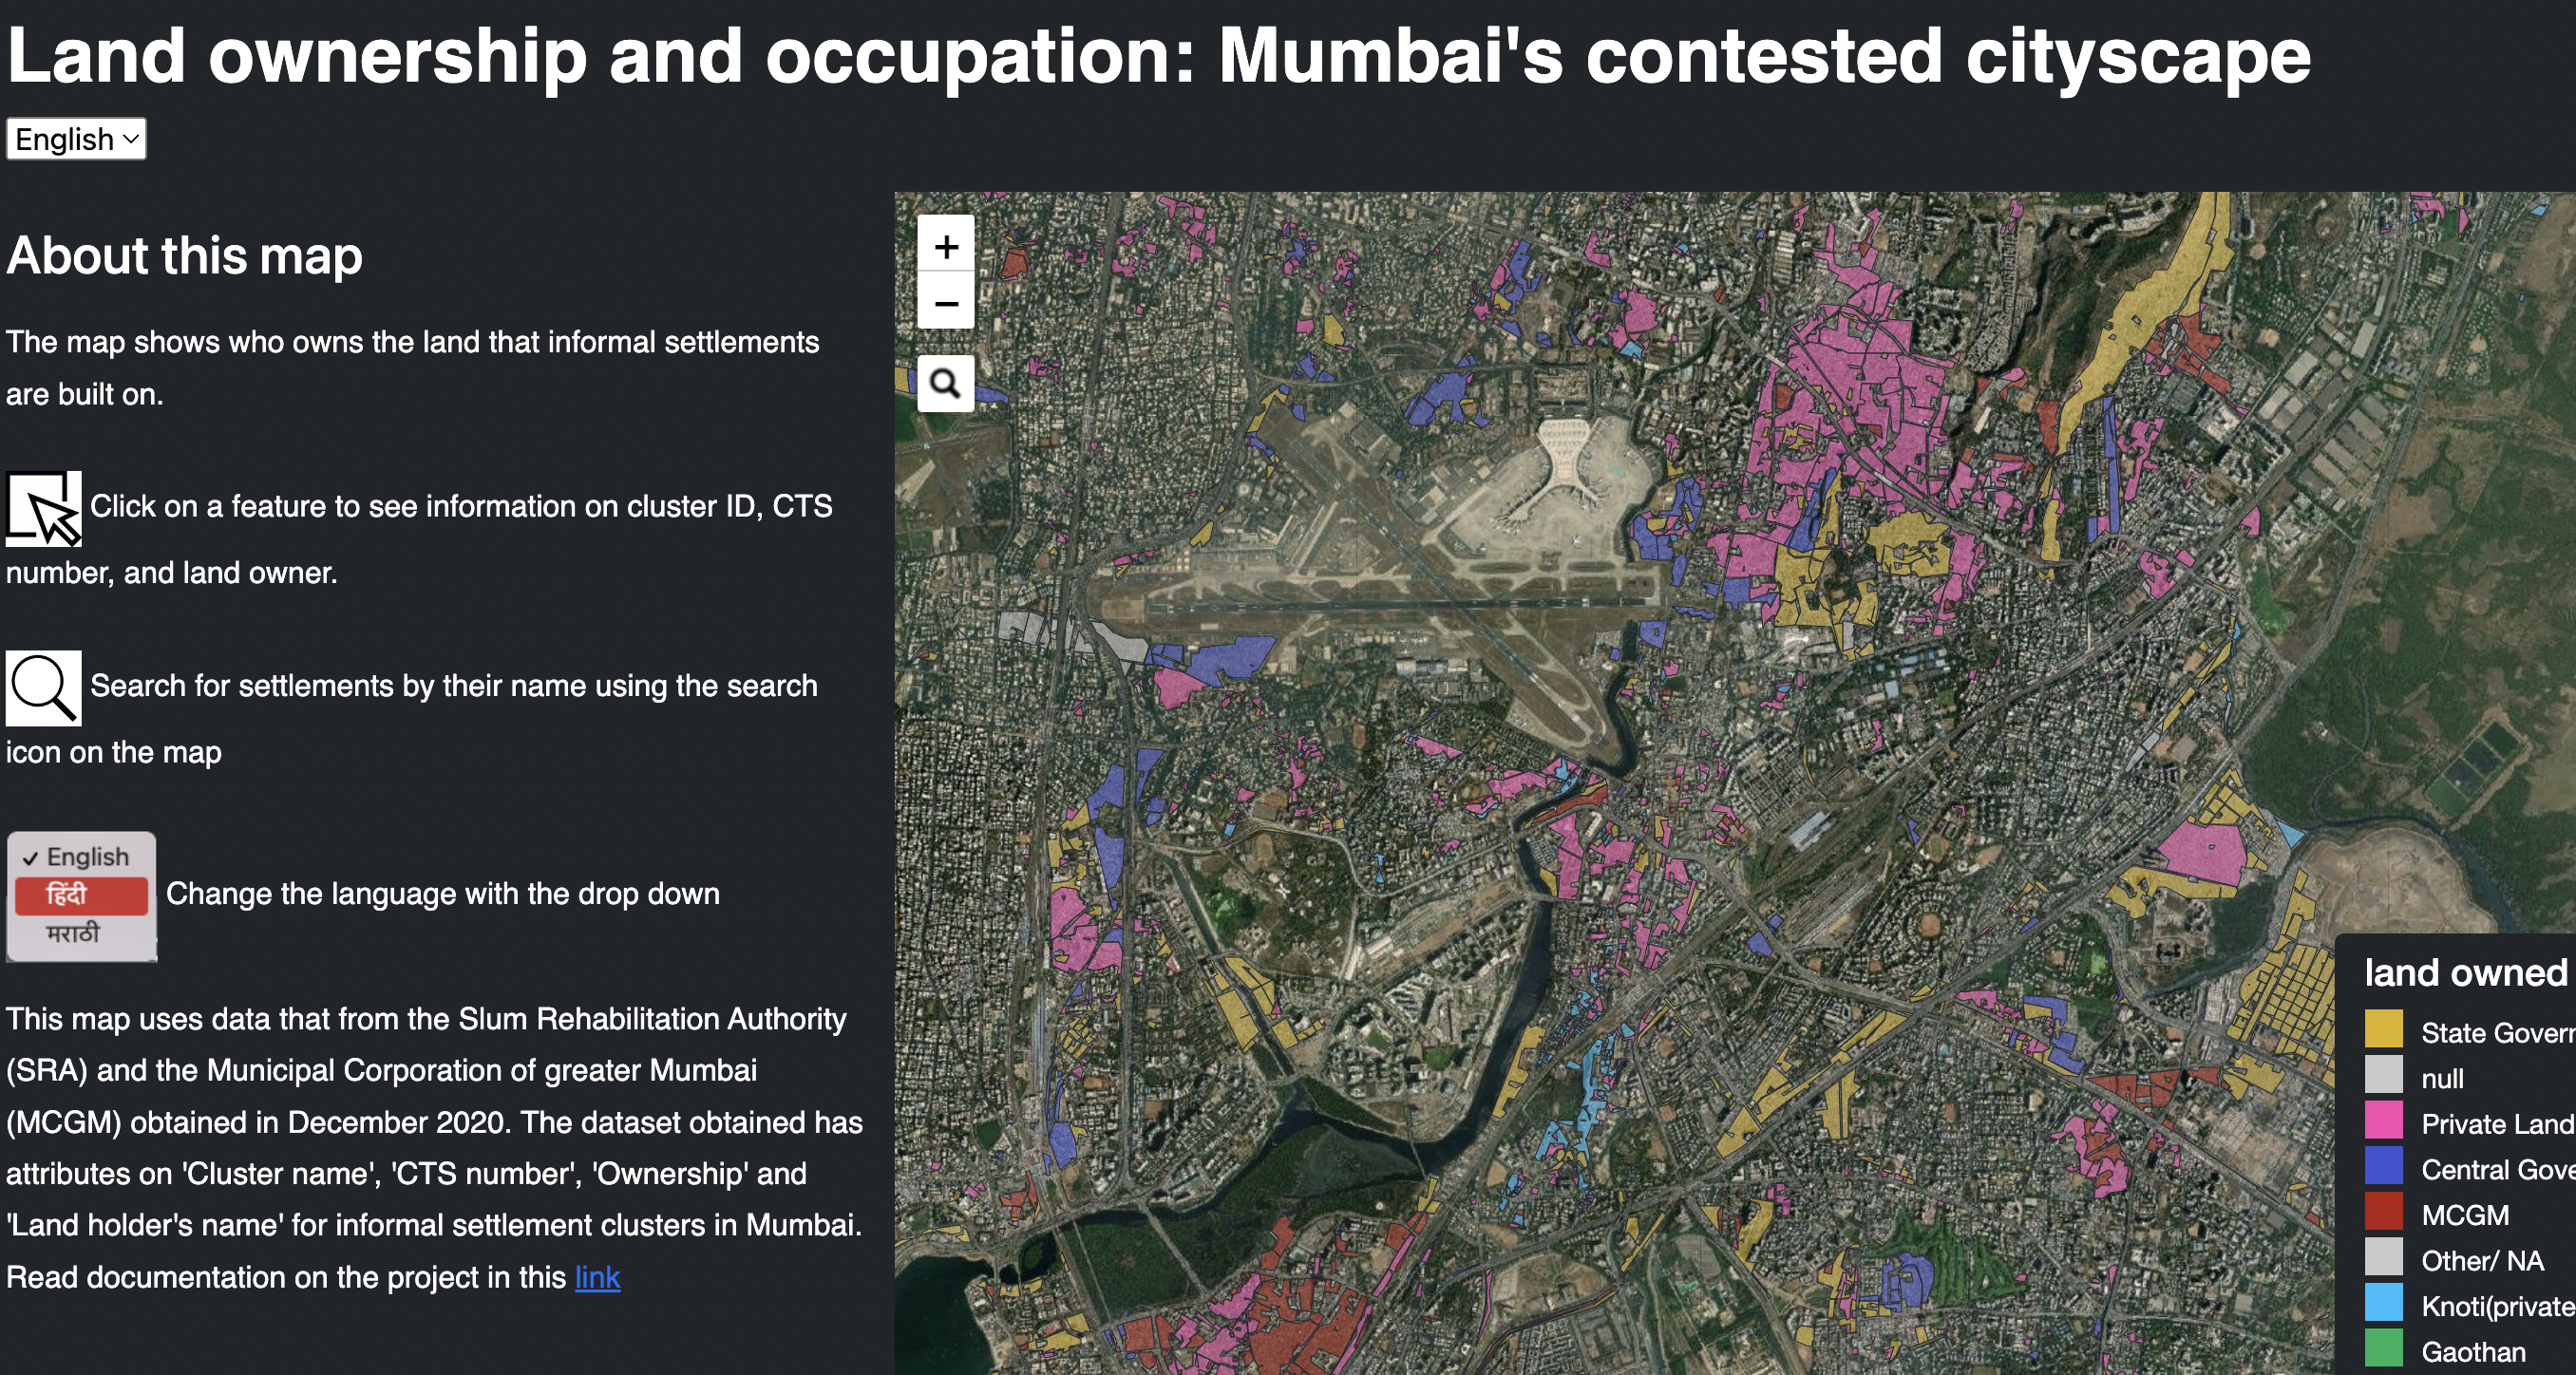 image shows map of land ownership in mumbai/></a>
                  <div class=